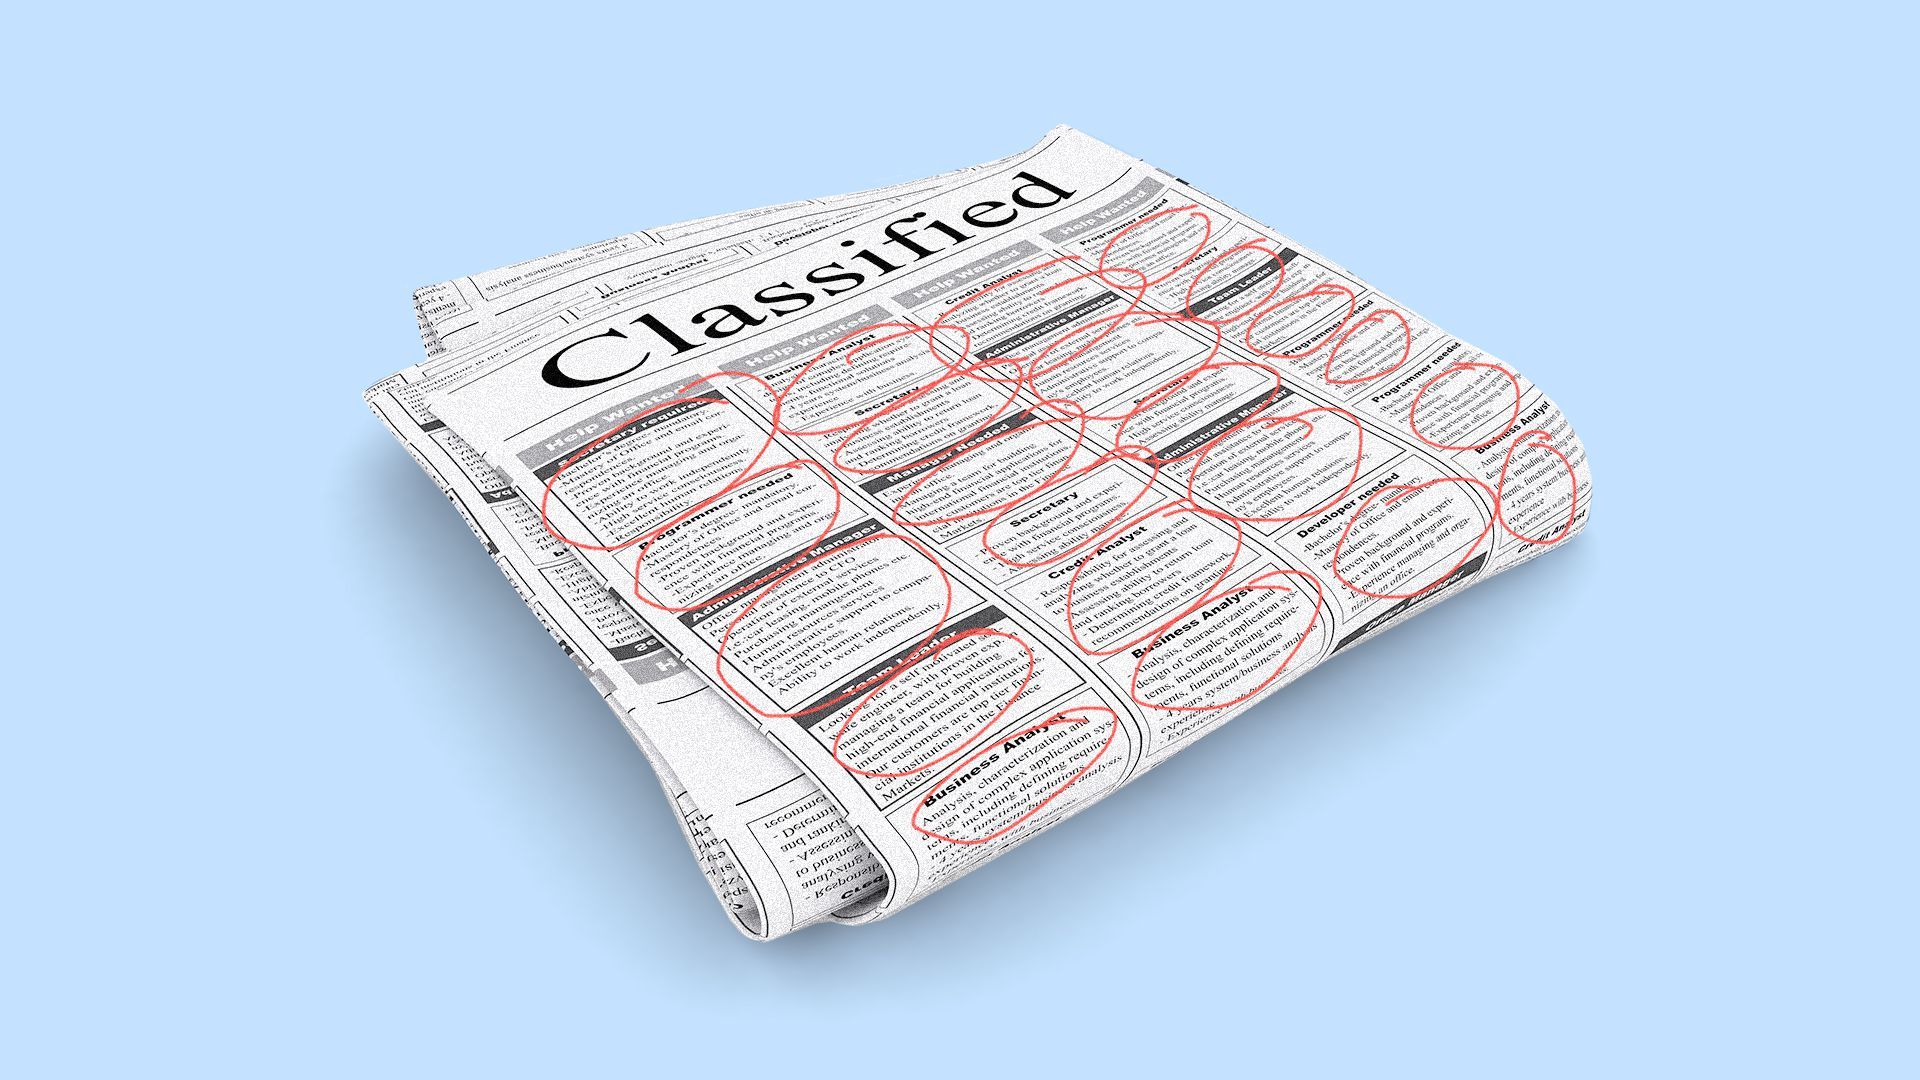 Illustration of the classified section of the newspaper with every posting circled in red